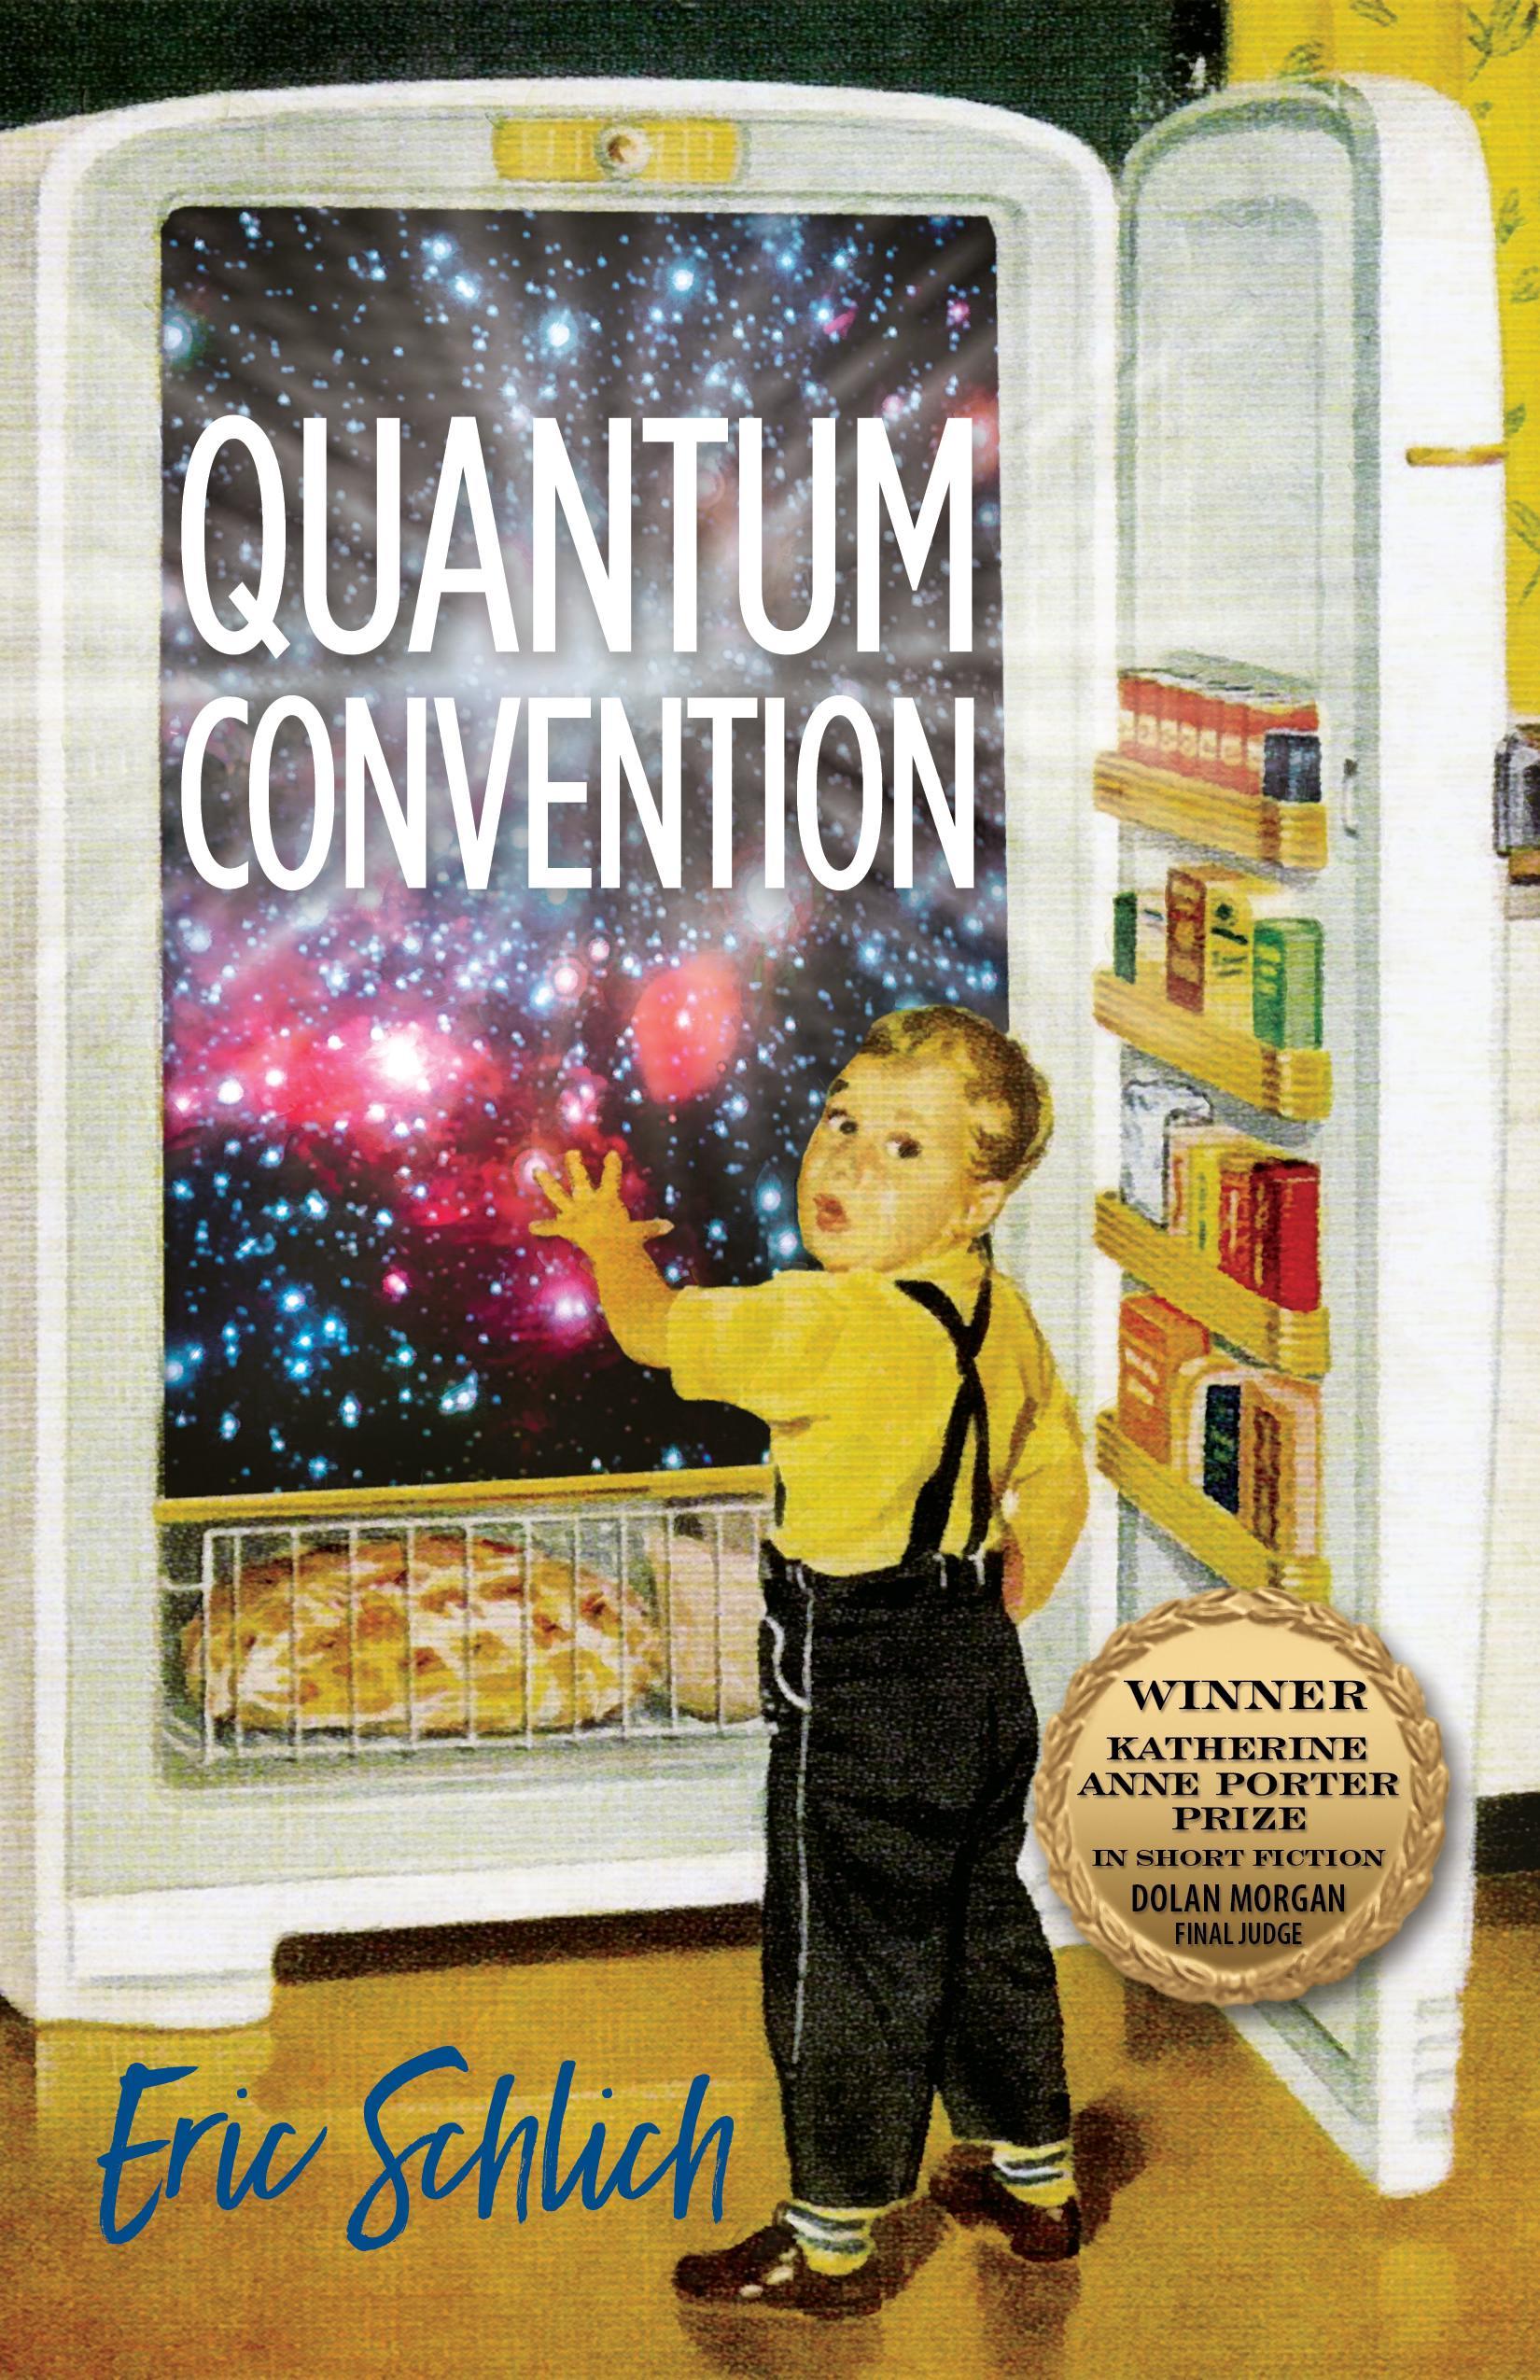 The cover of Quantum Convention